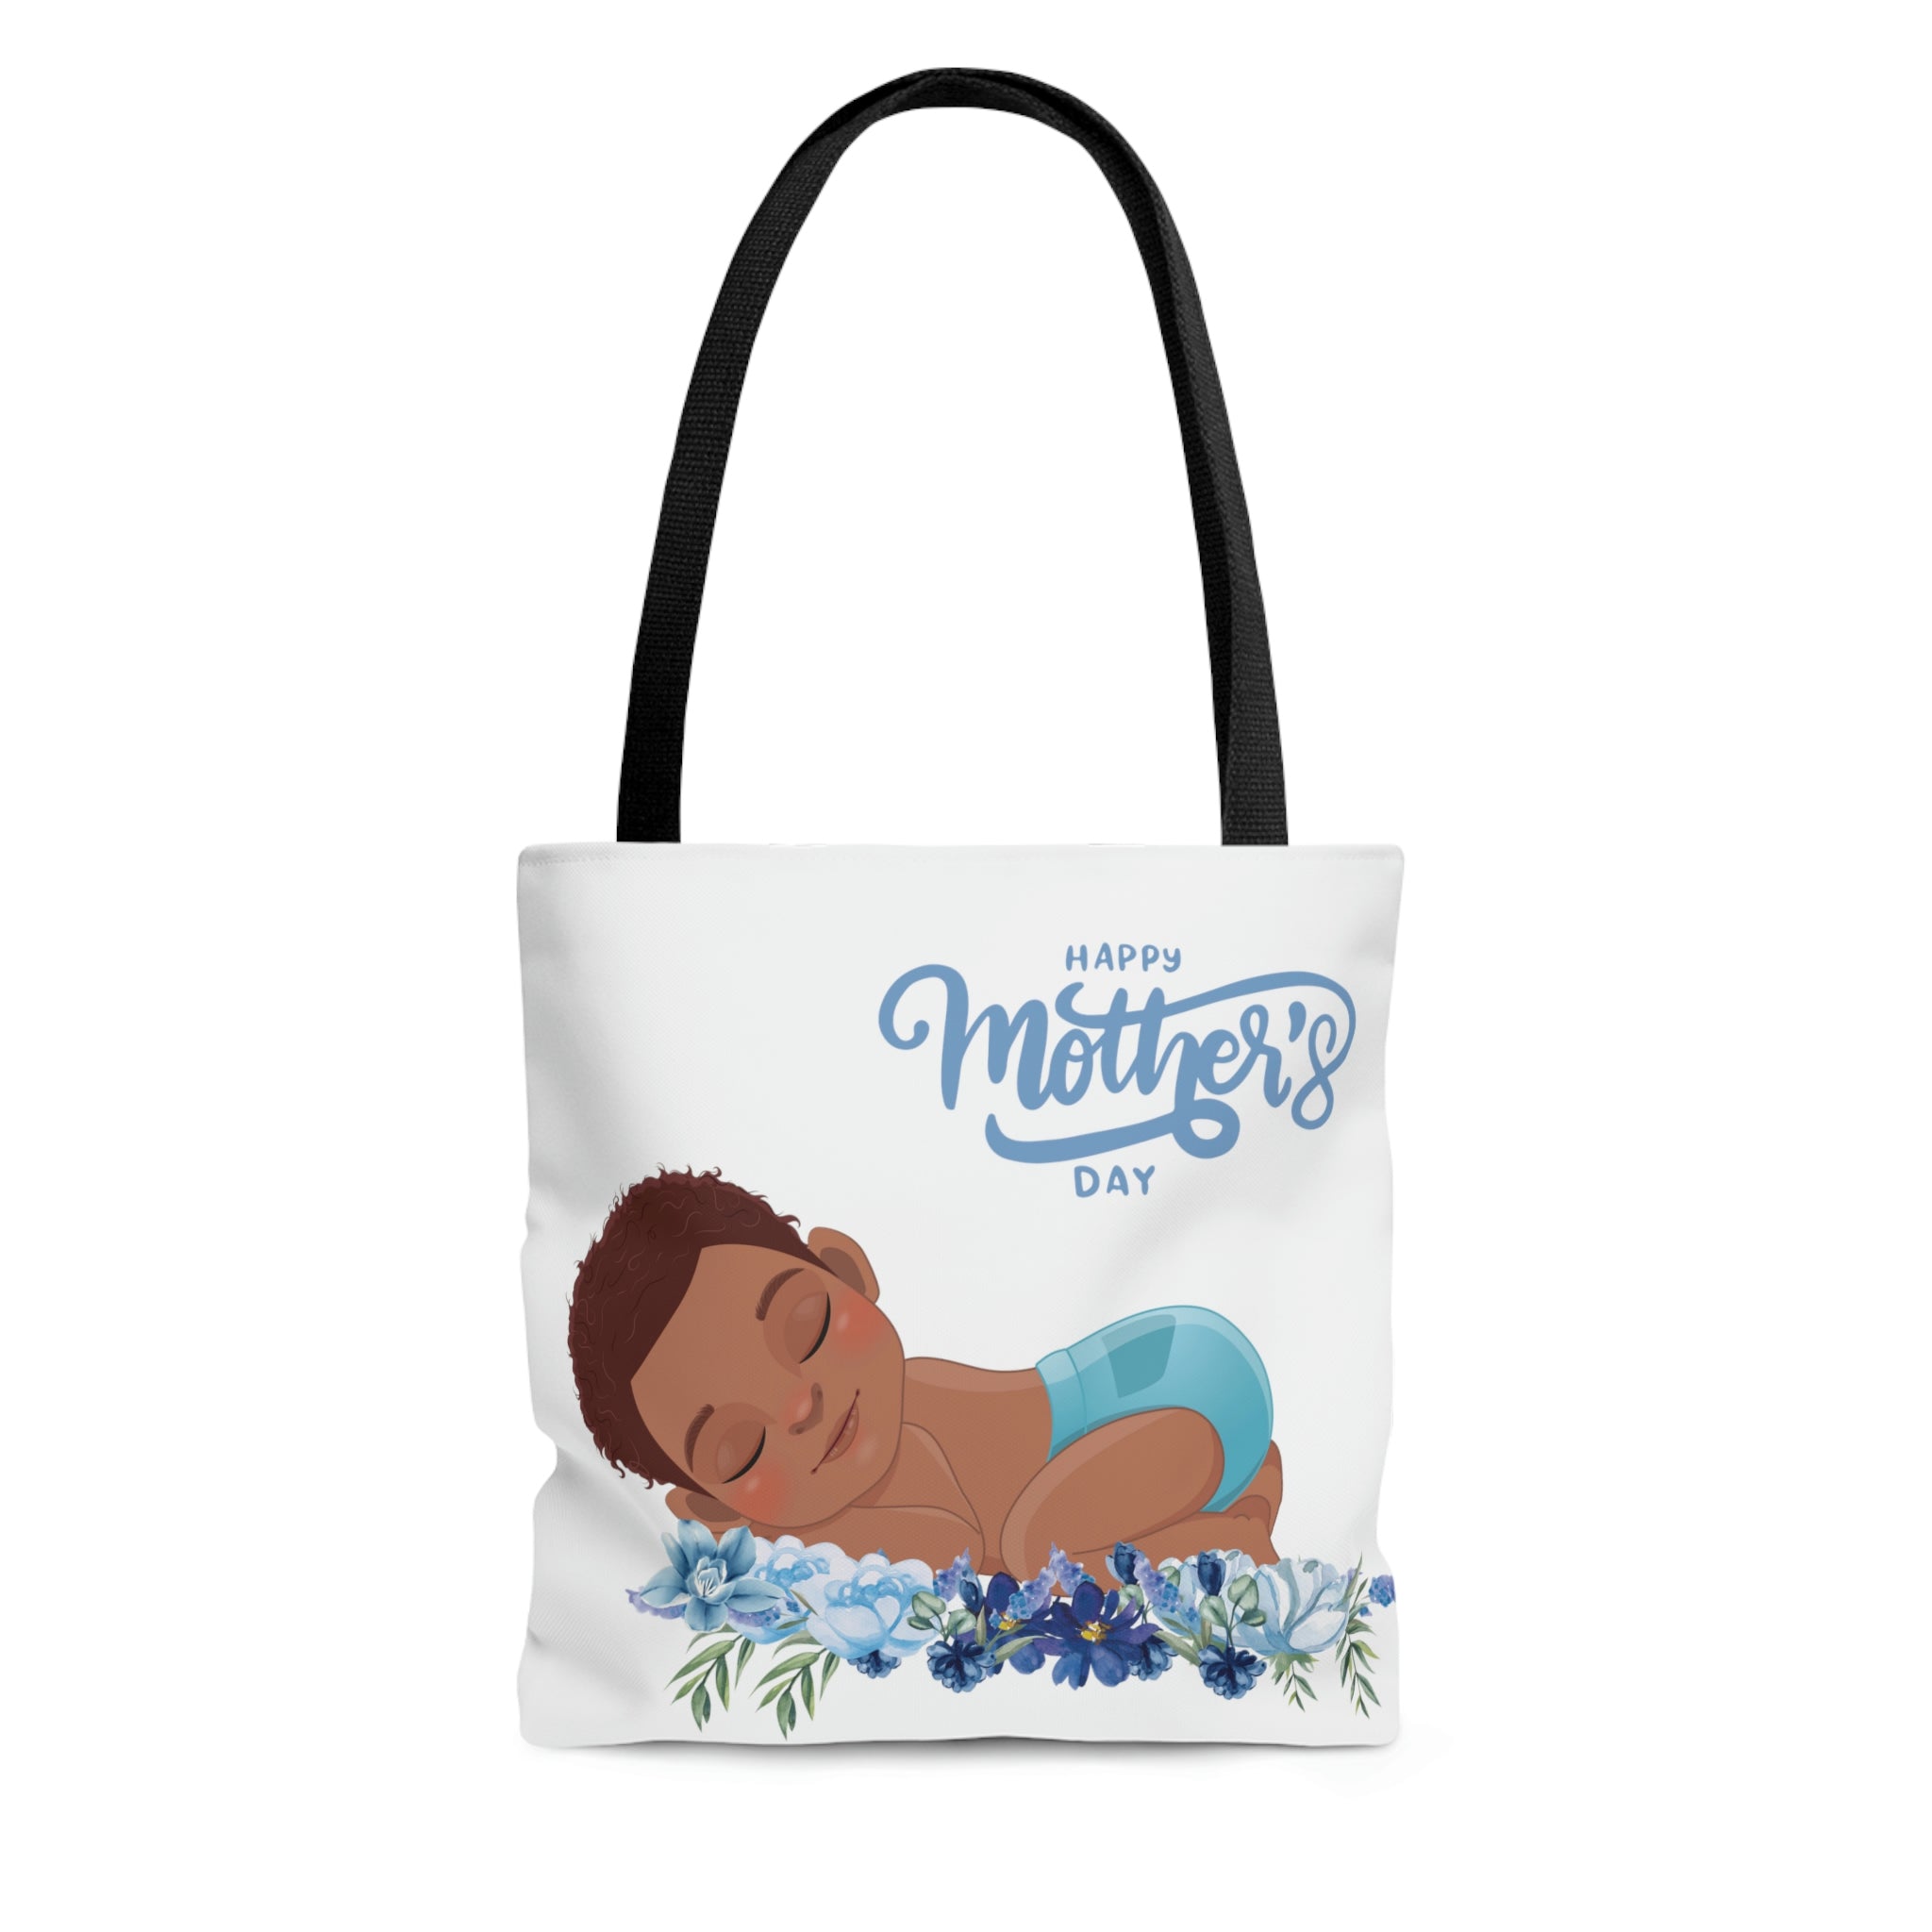 mothers day bag heart you mommy canvas value or heavyweight tote bag